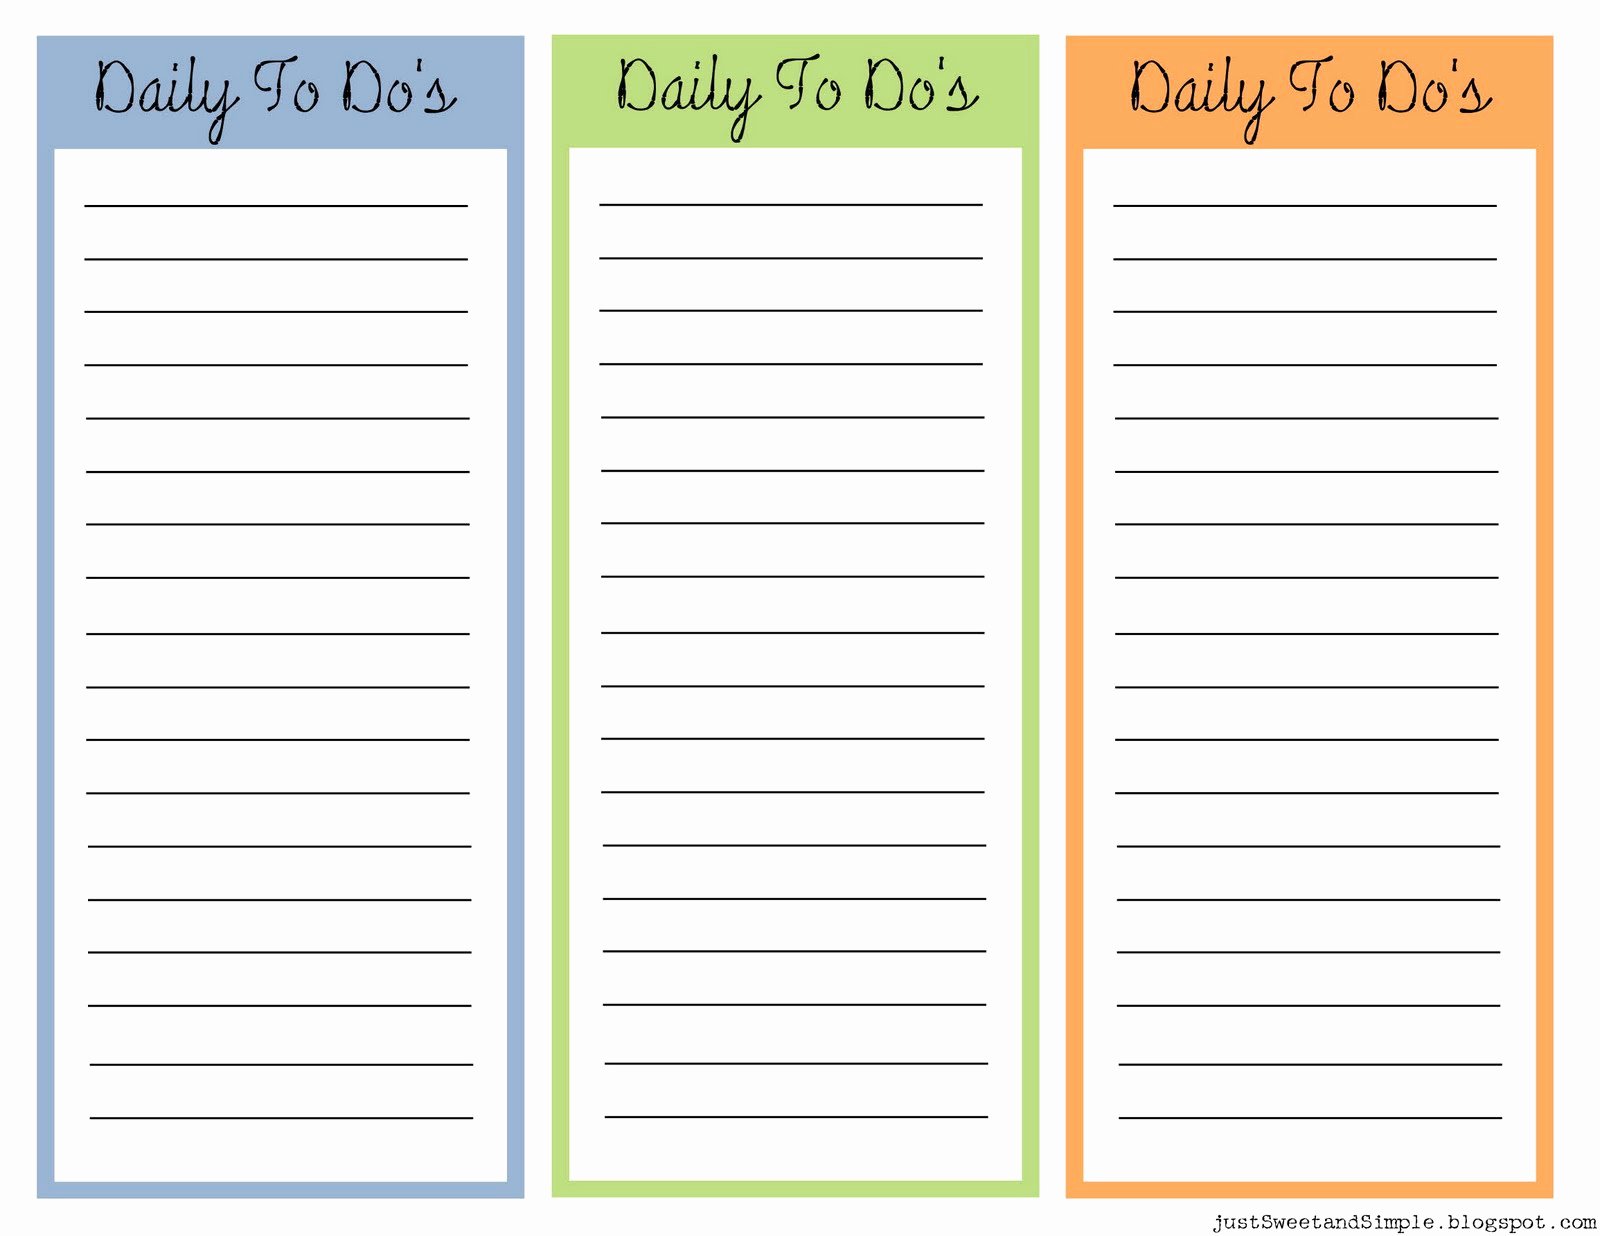 Just Sweet and Simple Printable Little Daily to Do List S